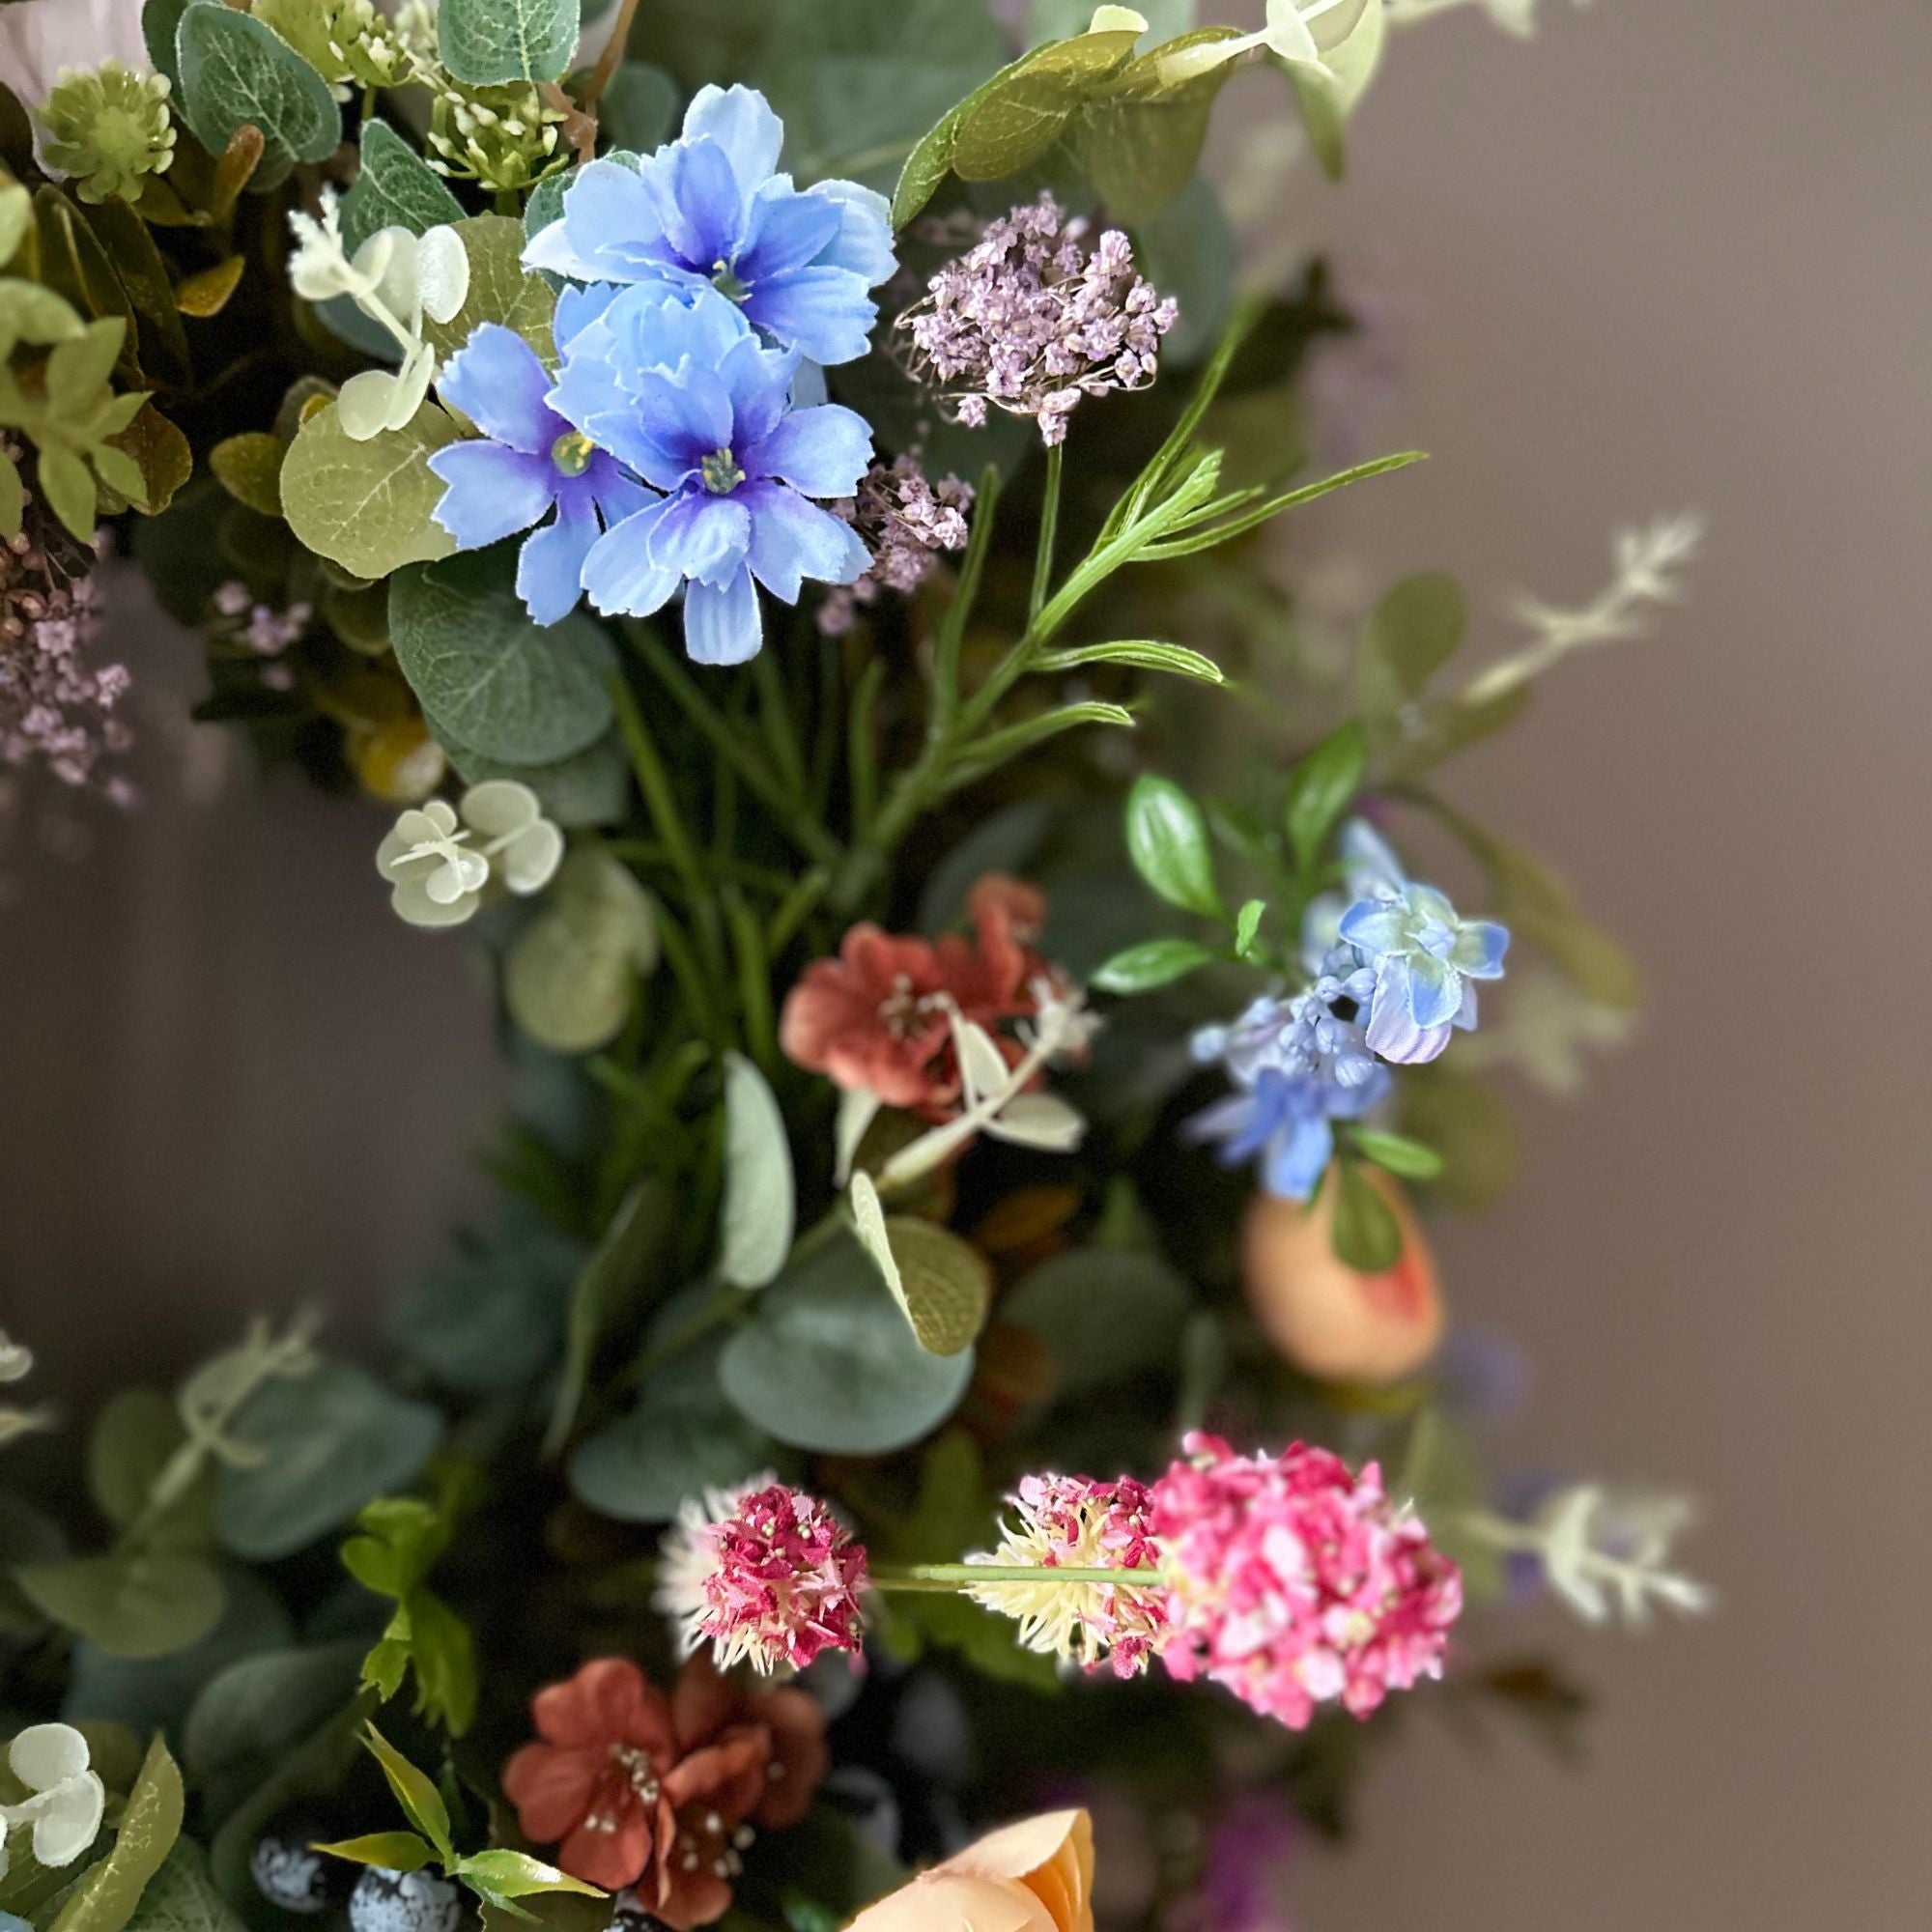 Radiant Blooms Faux Wreath